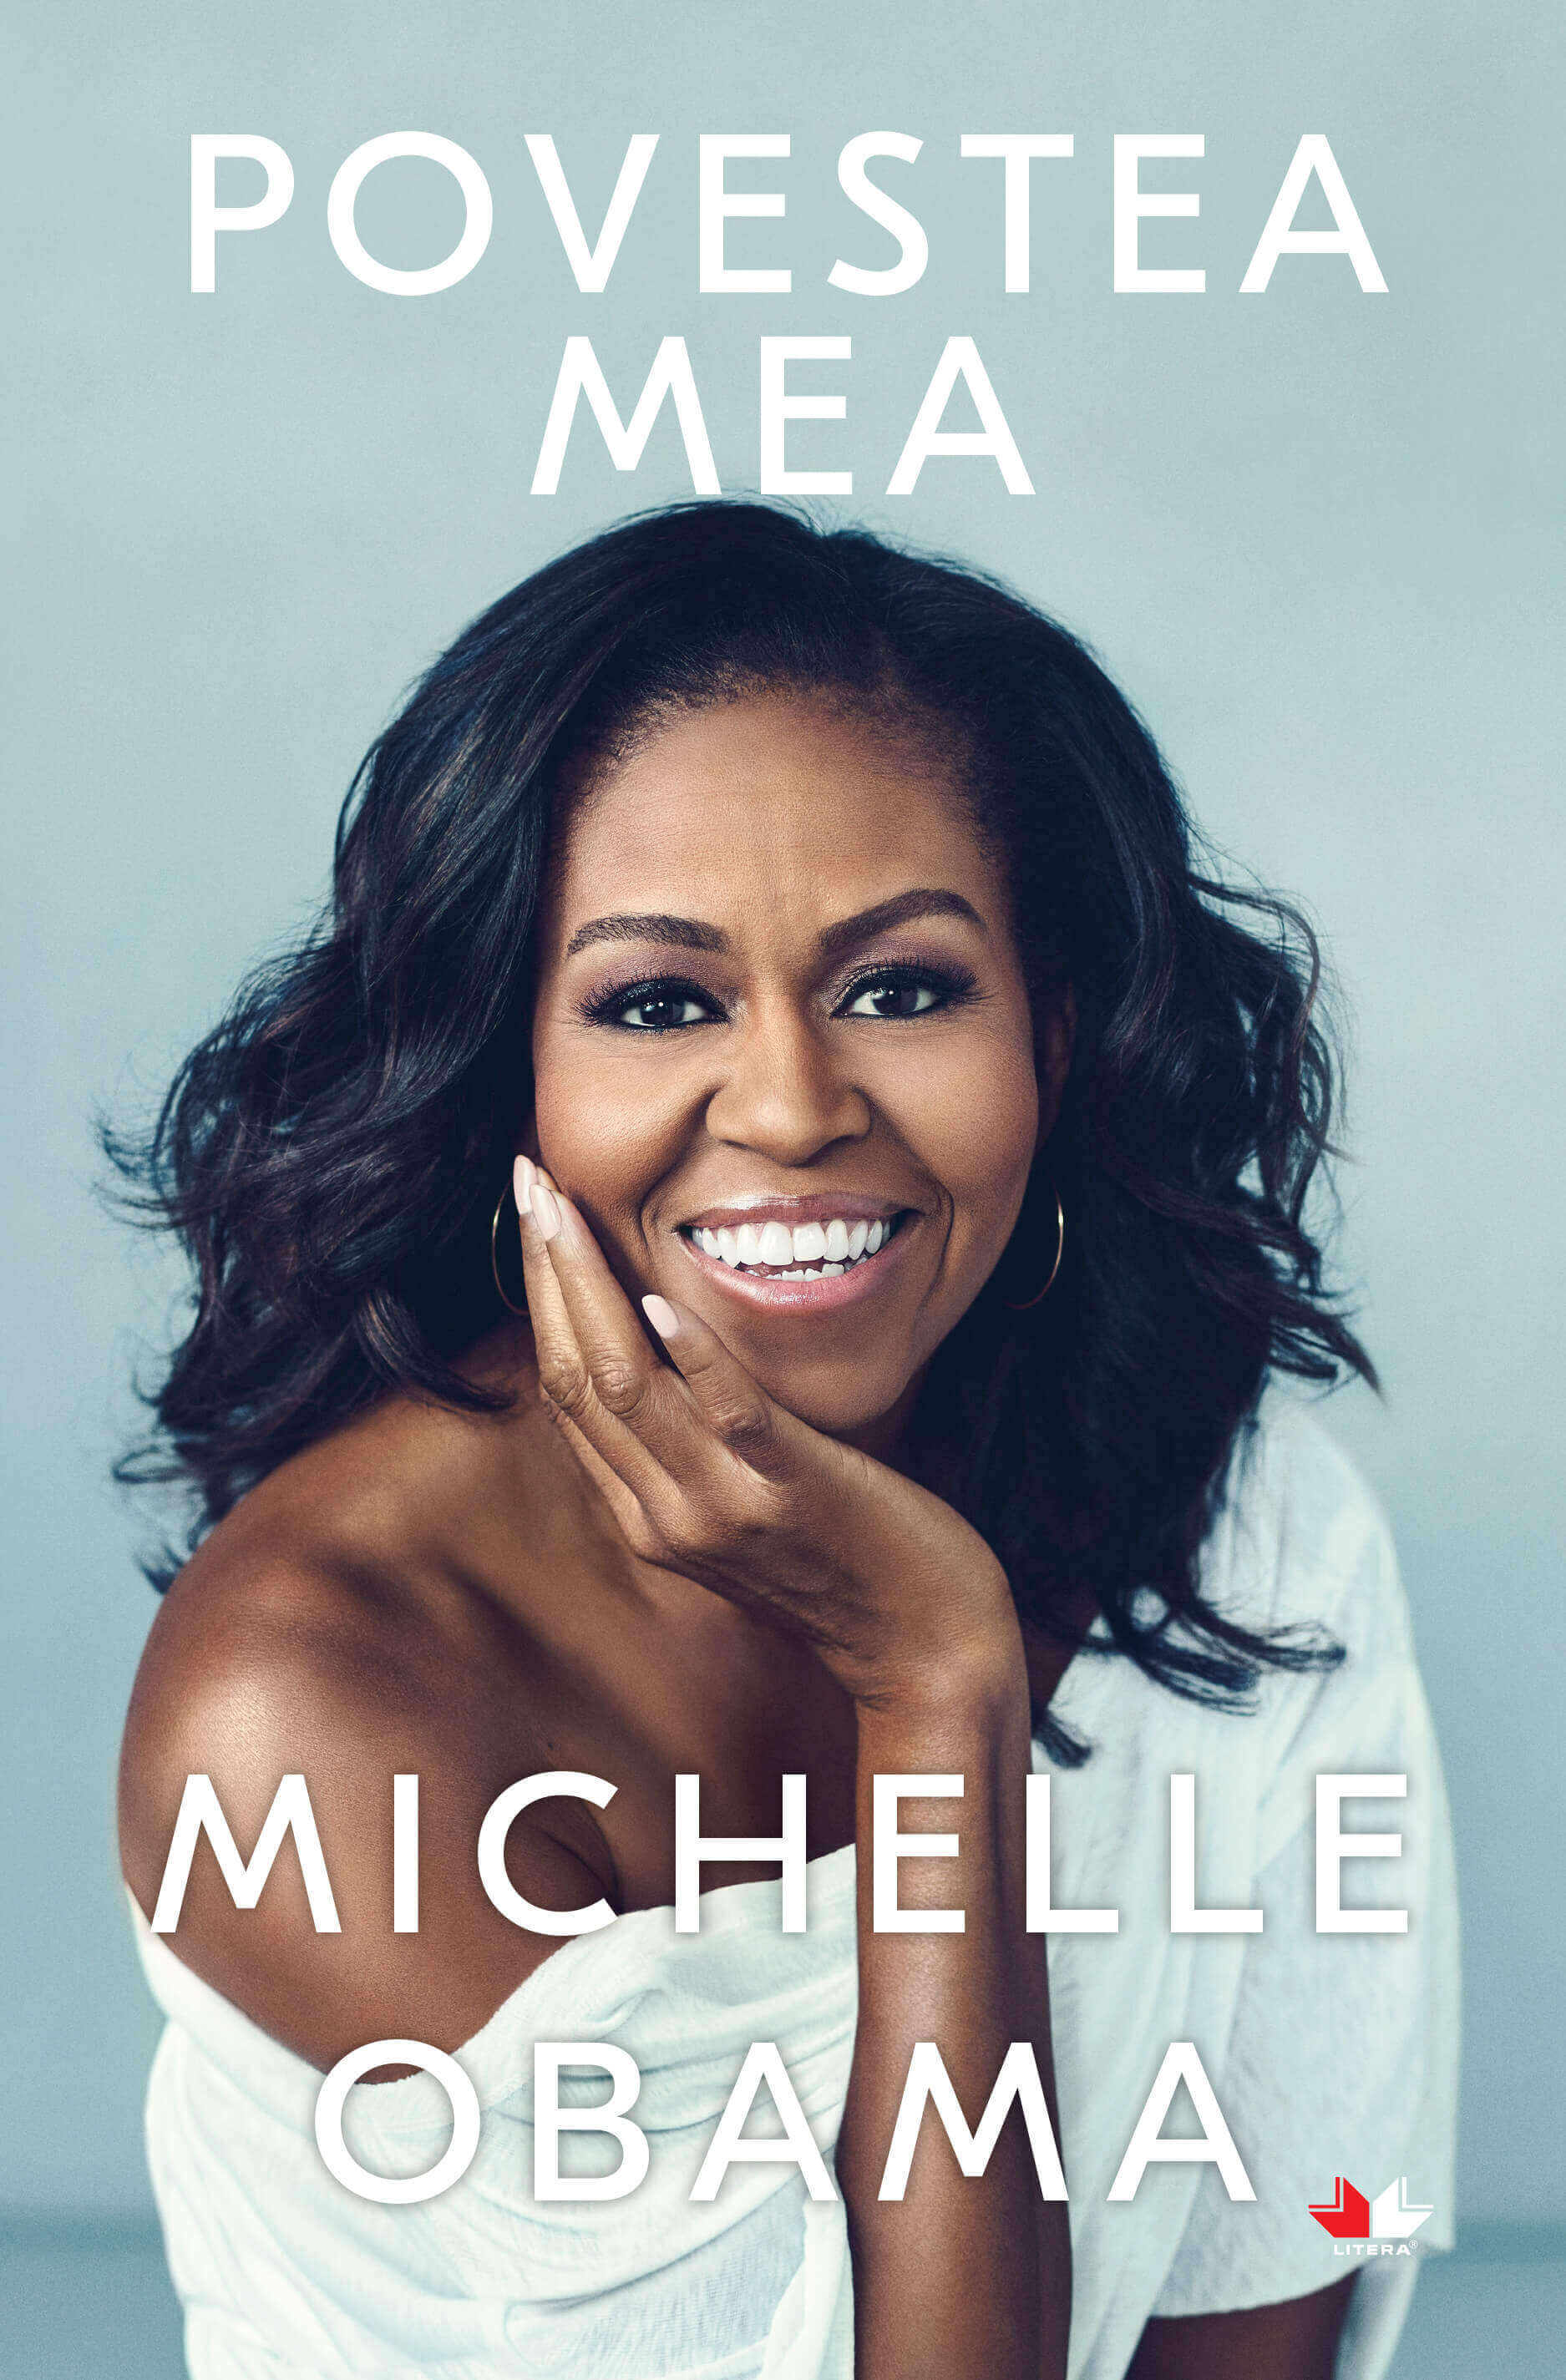 Will each other Actor Povestea mea - Michelle Obama